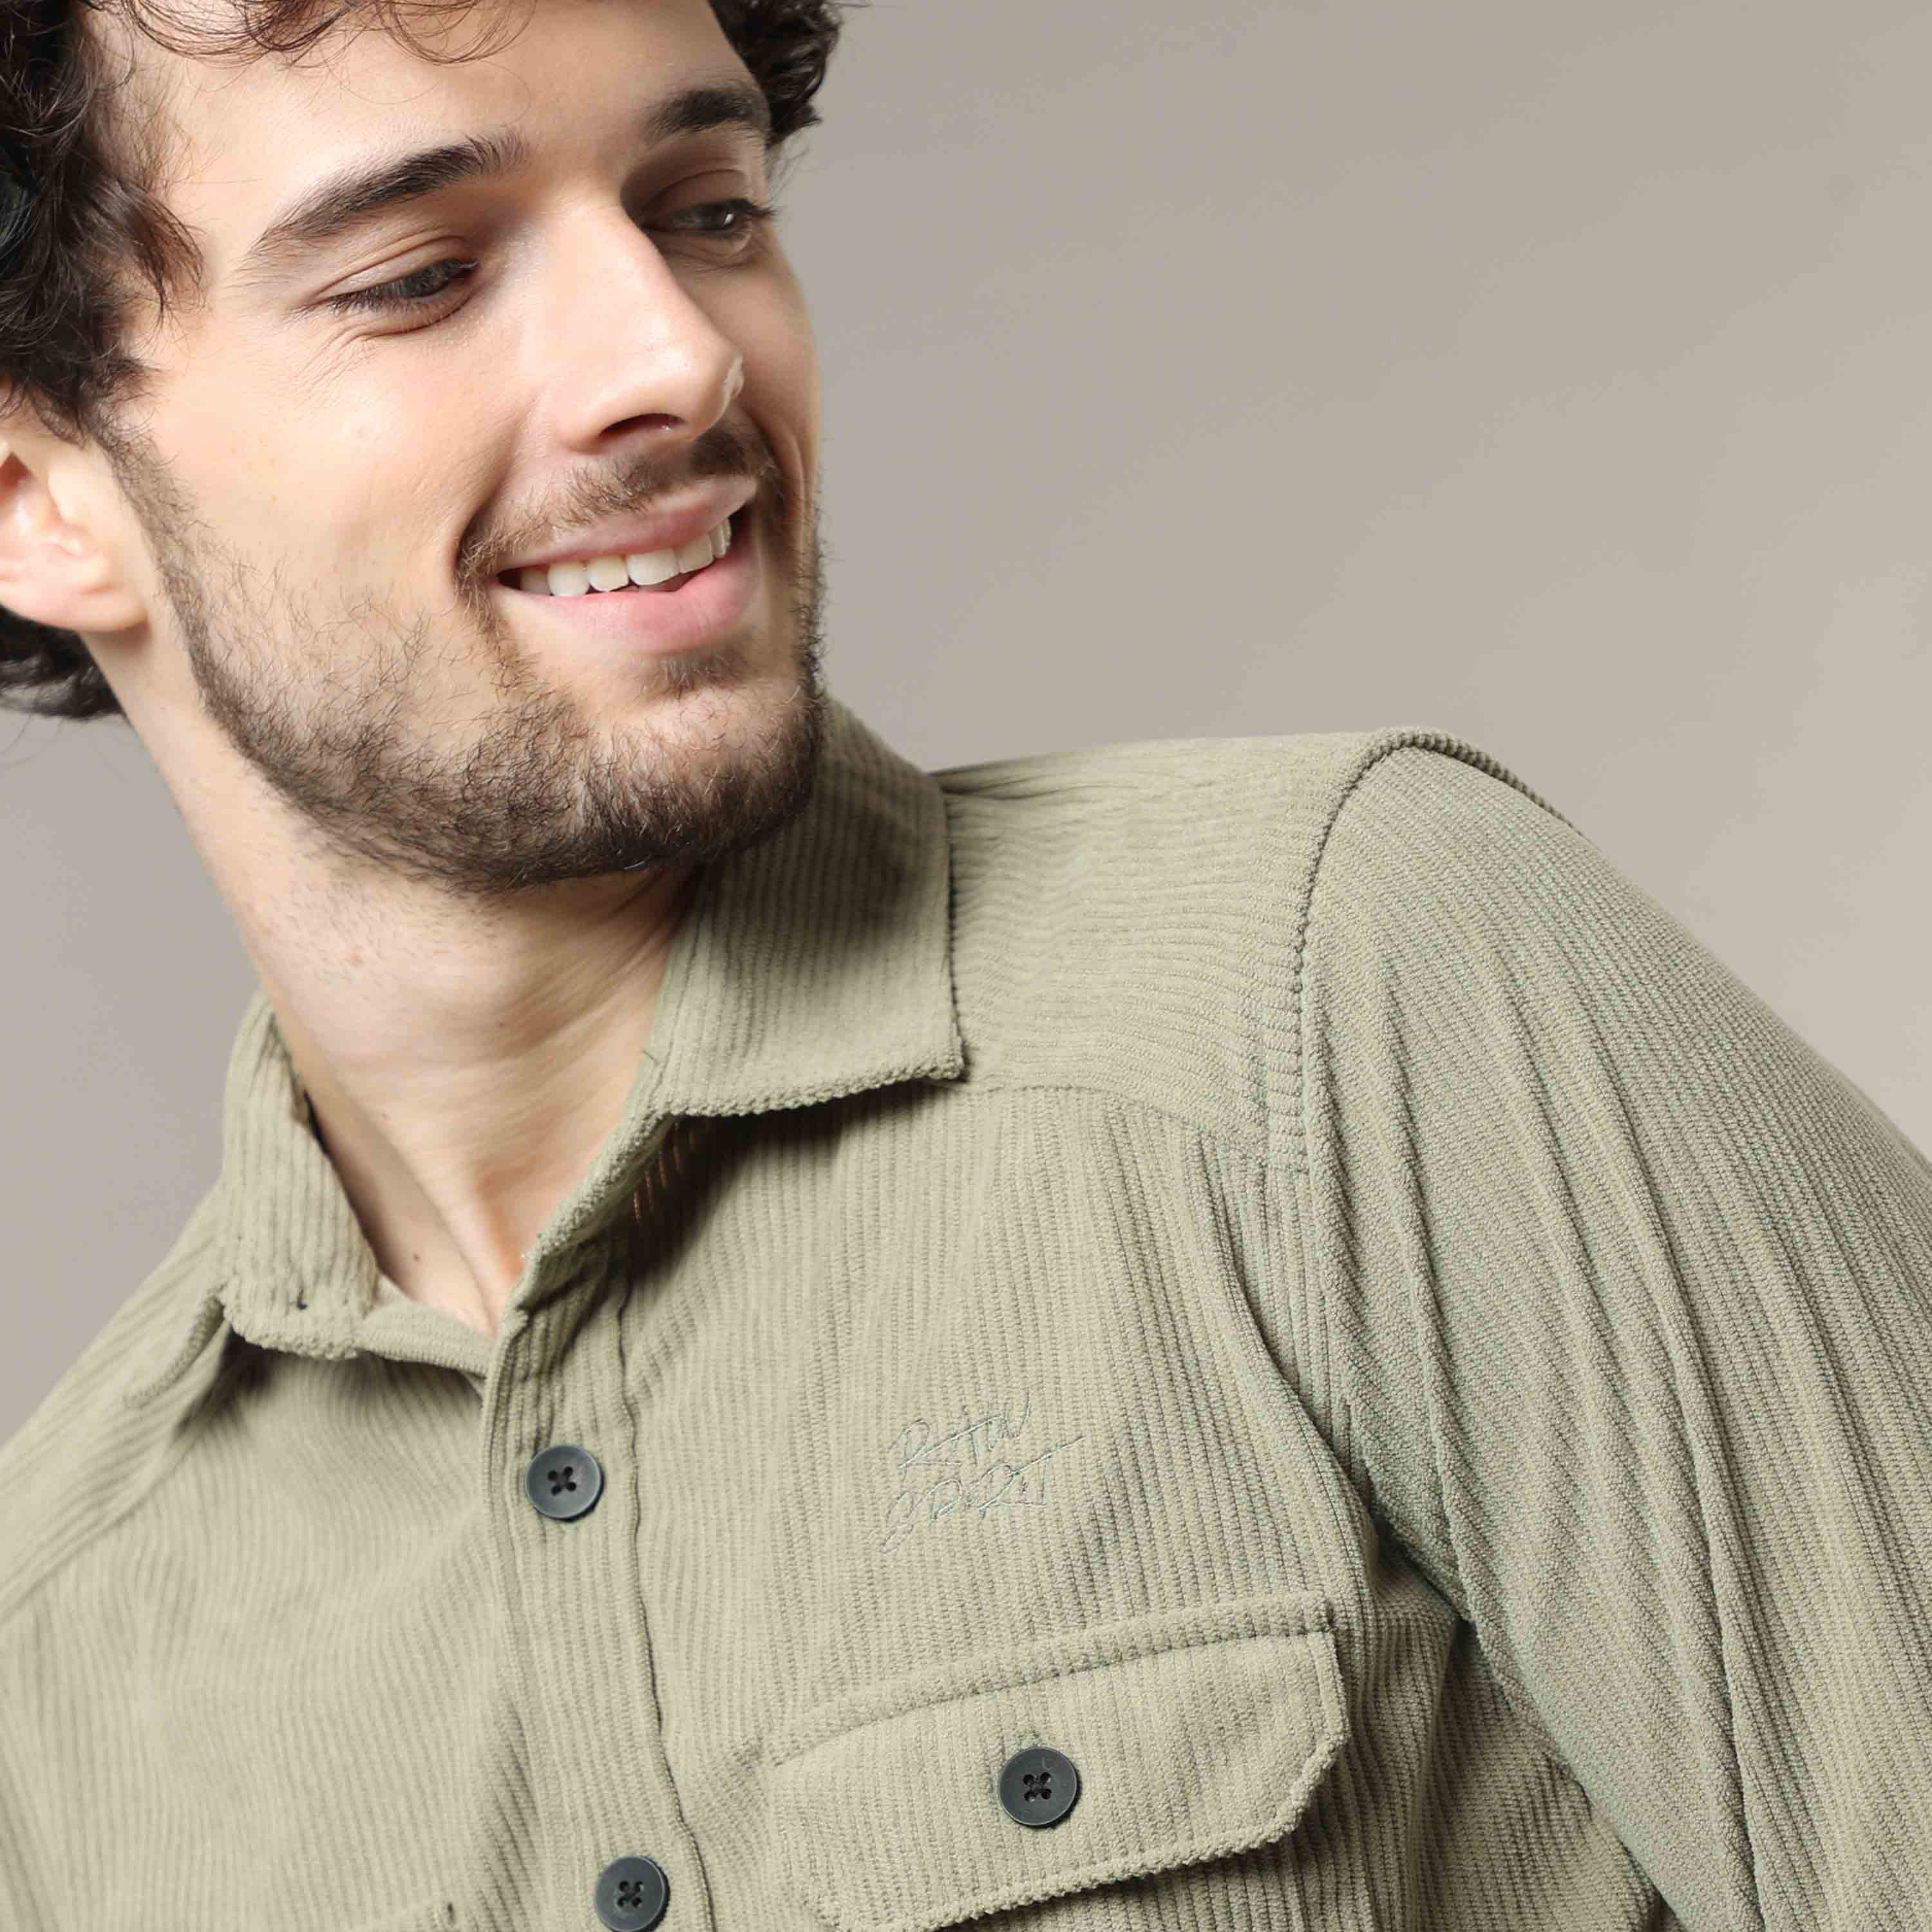 Shop Stylish Lime Green Corduroy Shirt Online In IndiaRs. 1499.00